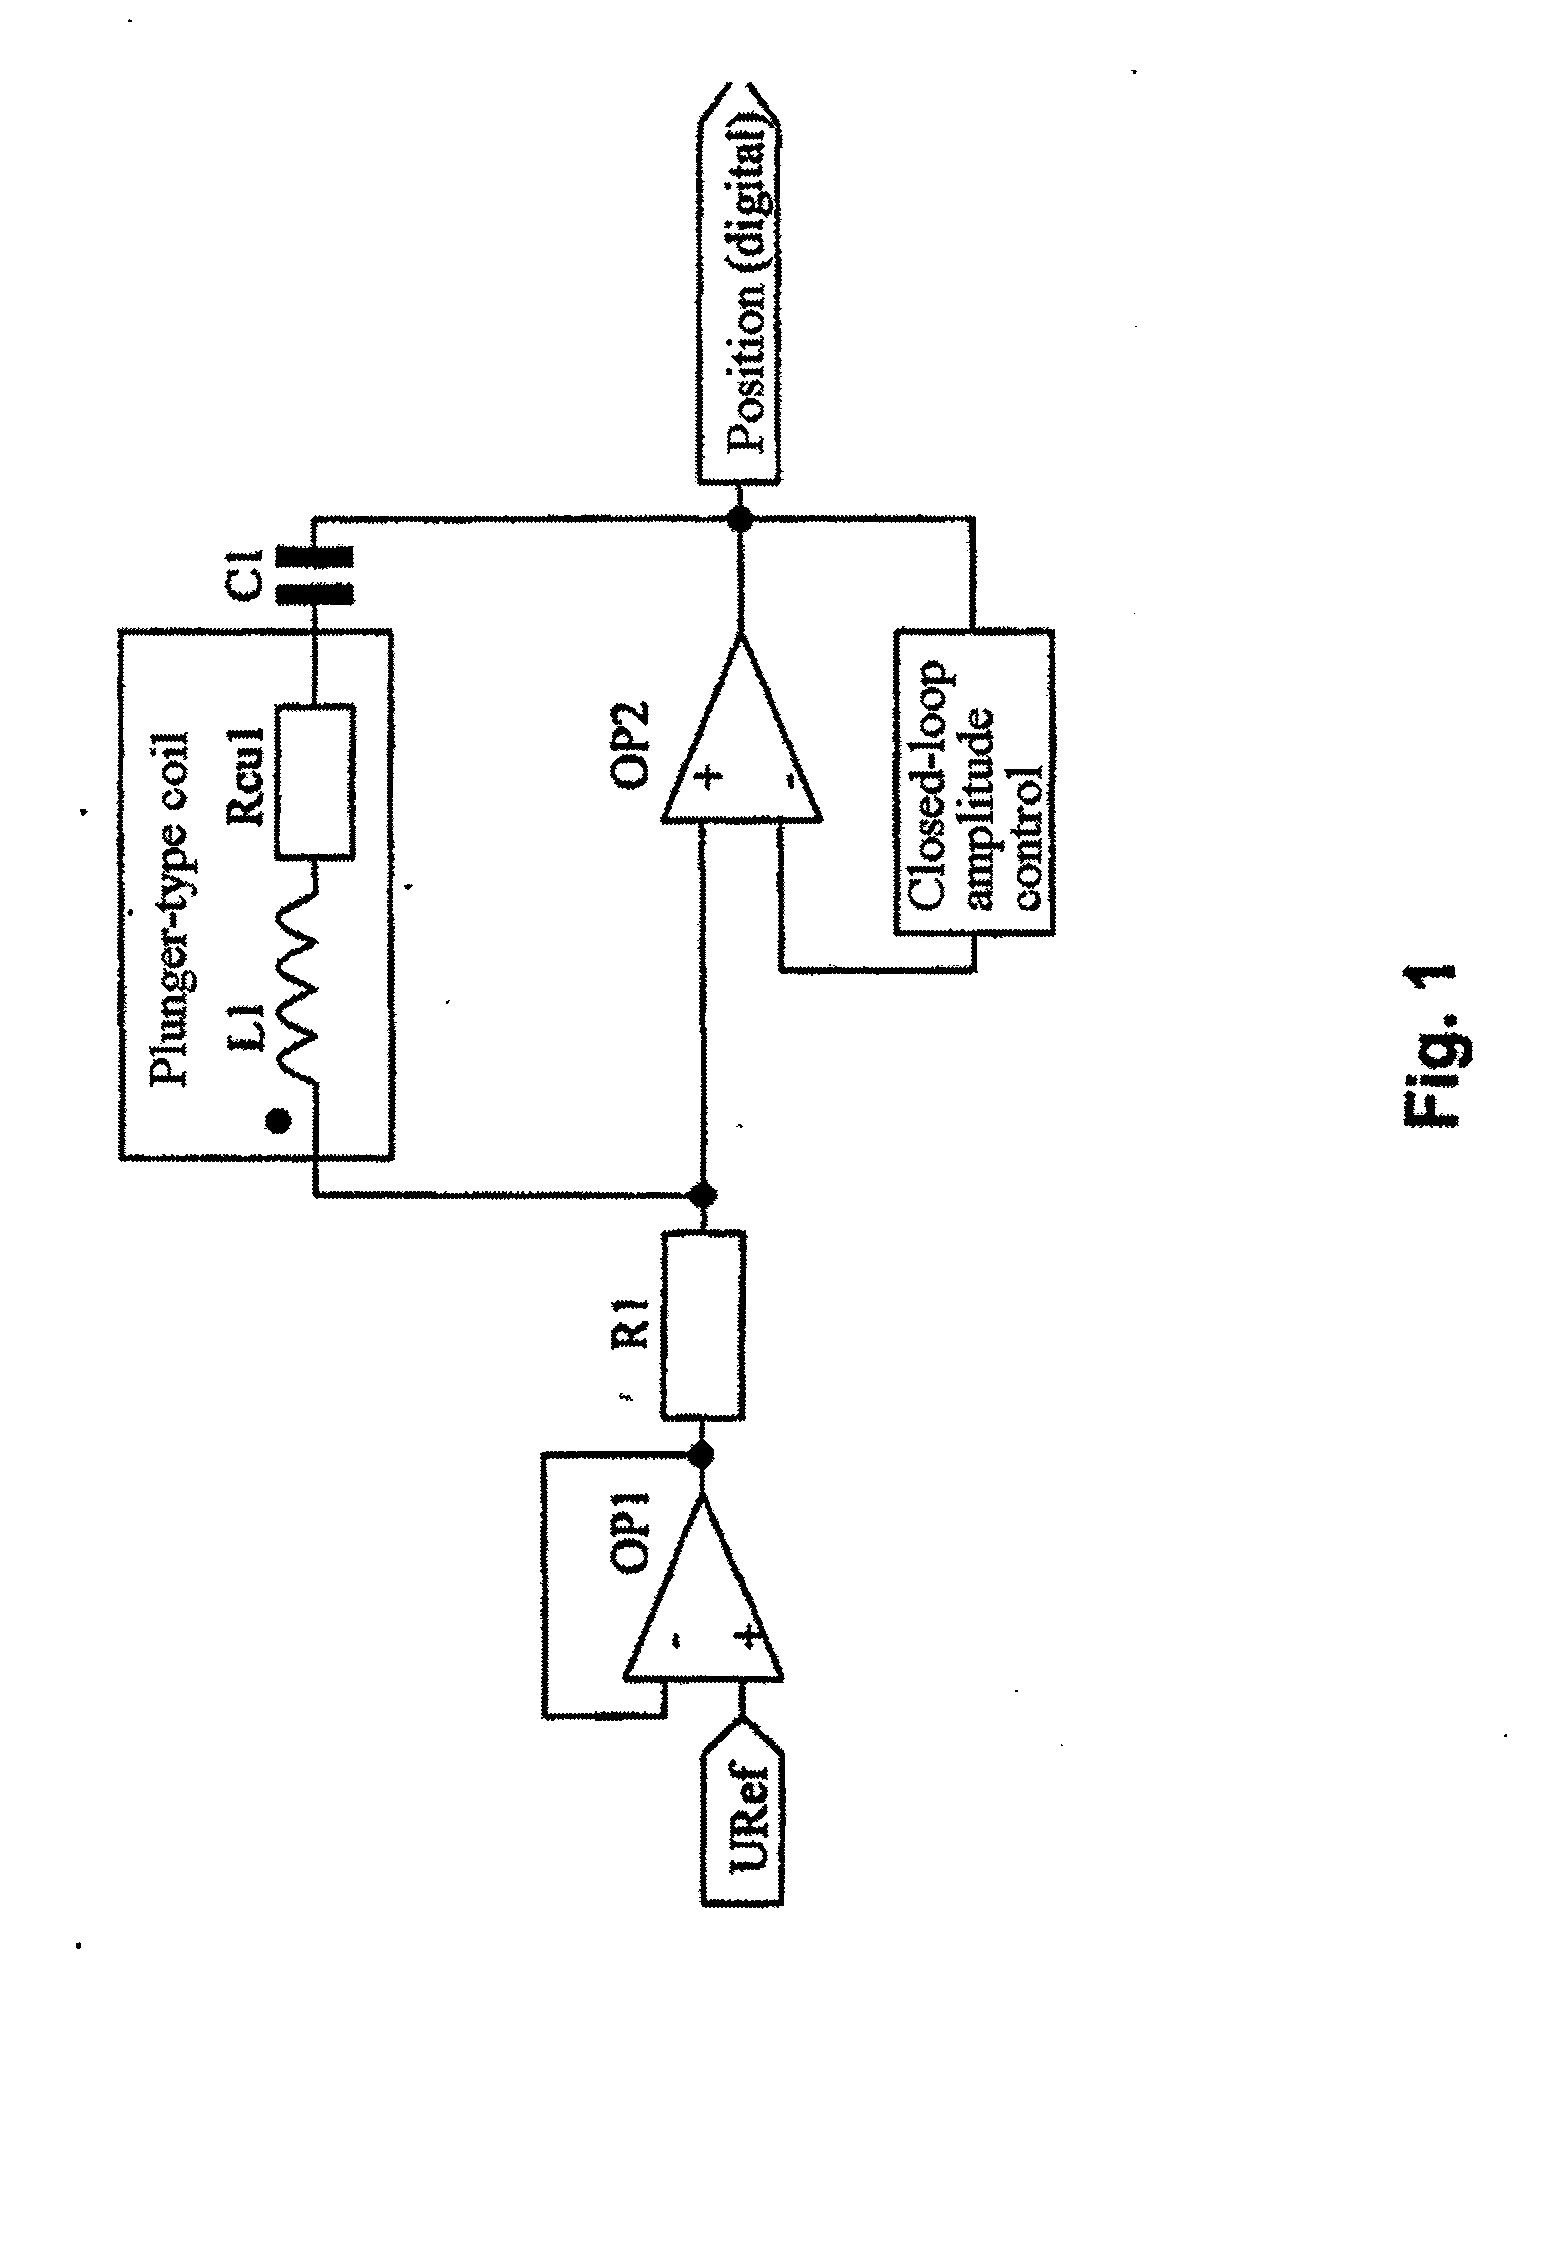 Analysis and Compensation Circuit for an Inductive Displacement Sensor